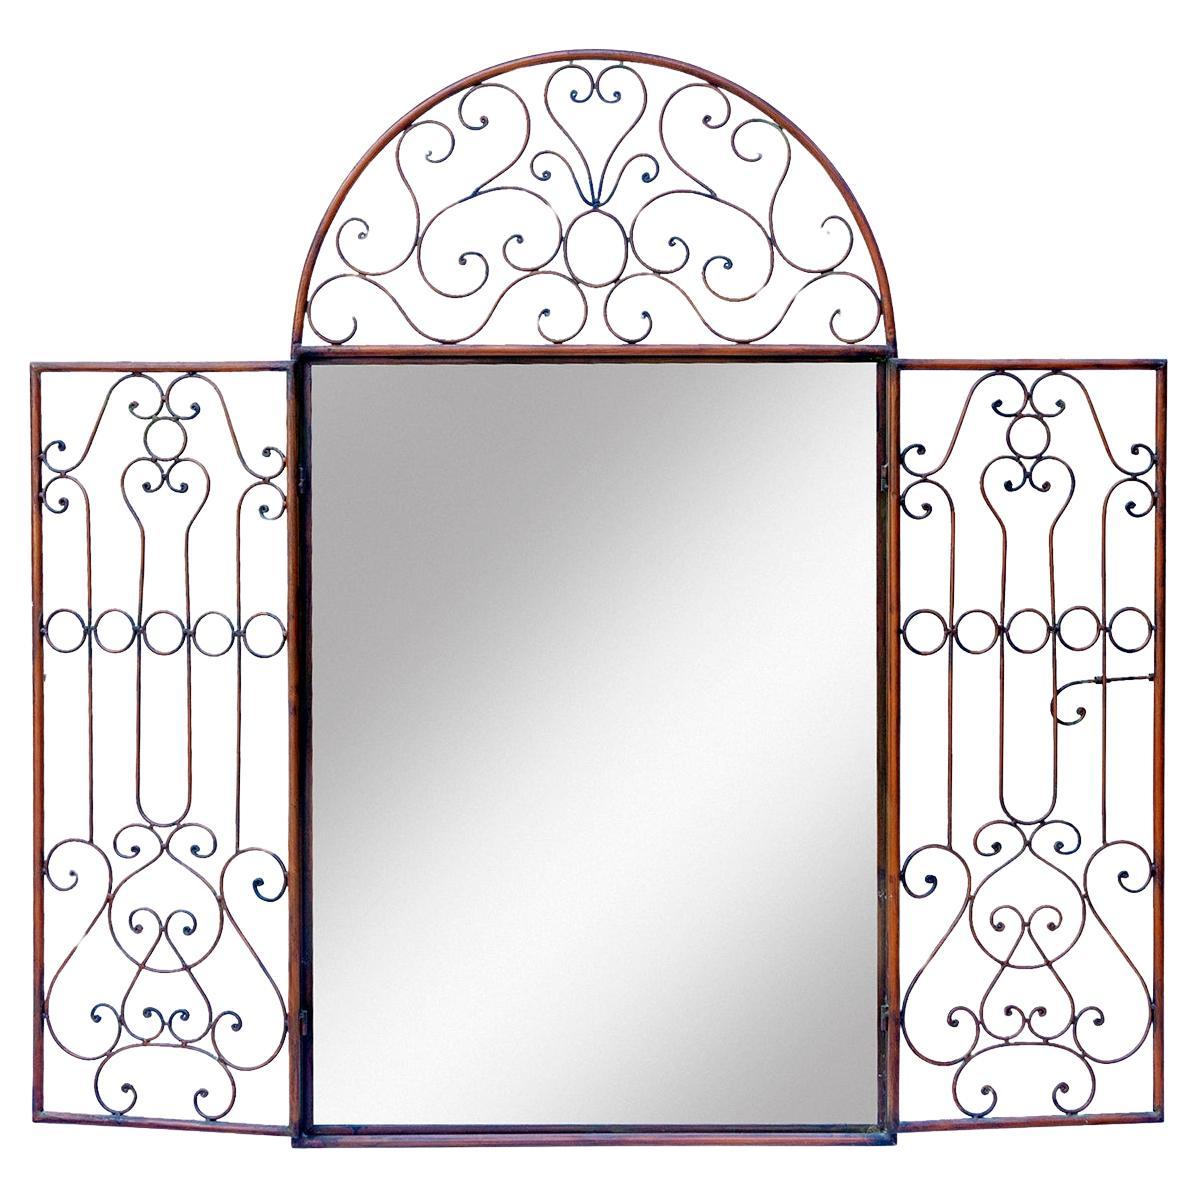 Stunning wrought iron frame mirror that features scroll detail. The doors secure shut with a latch. When the doors open a full view of the mirror is revealed.
